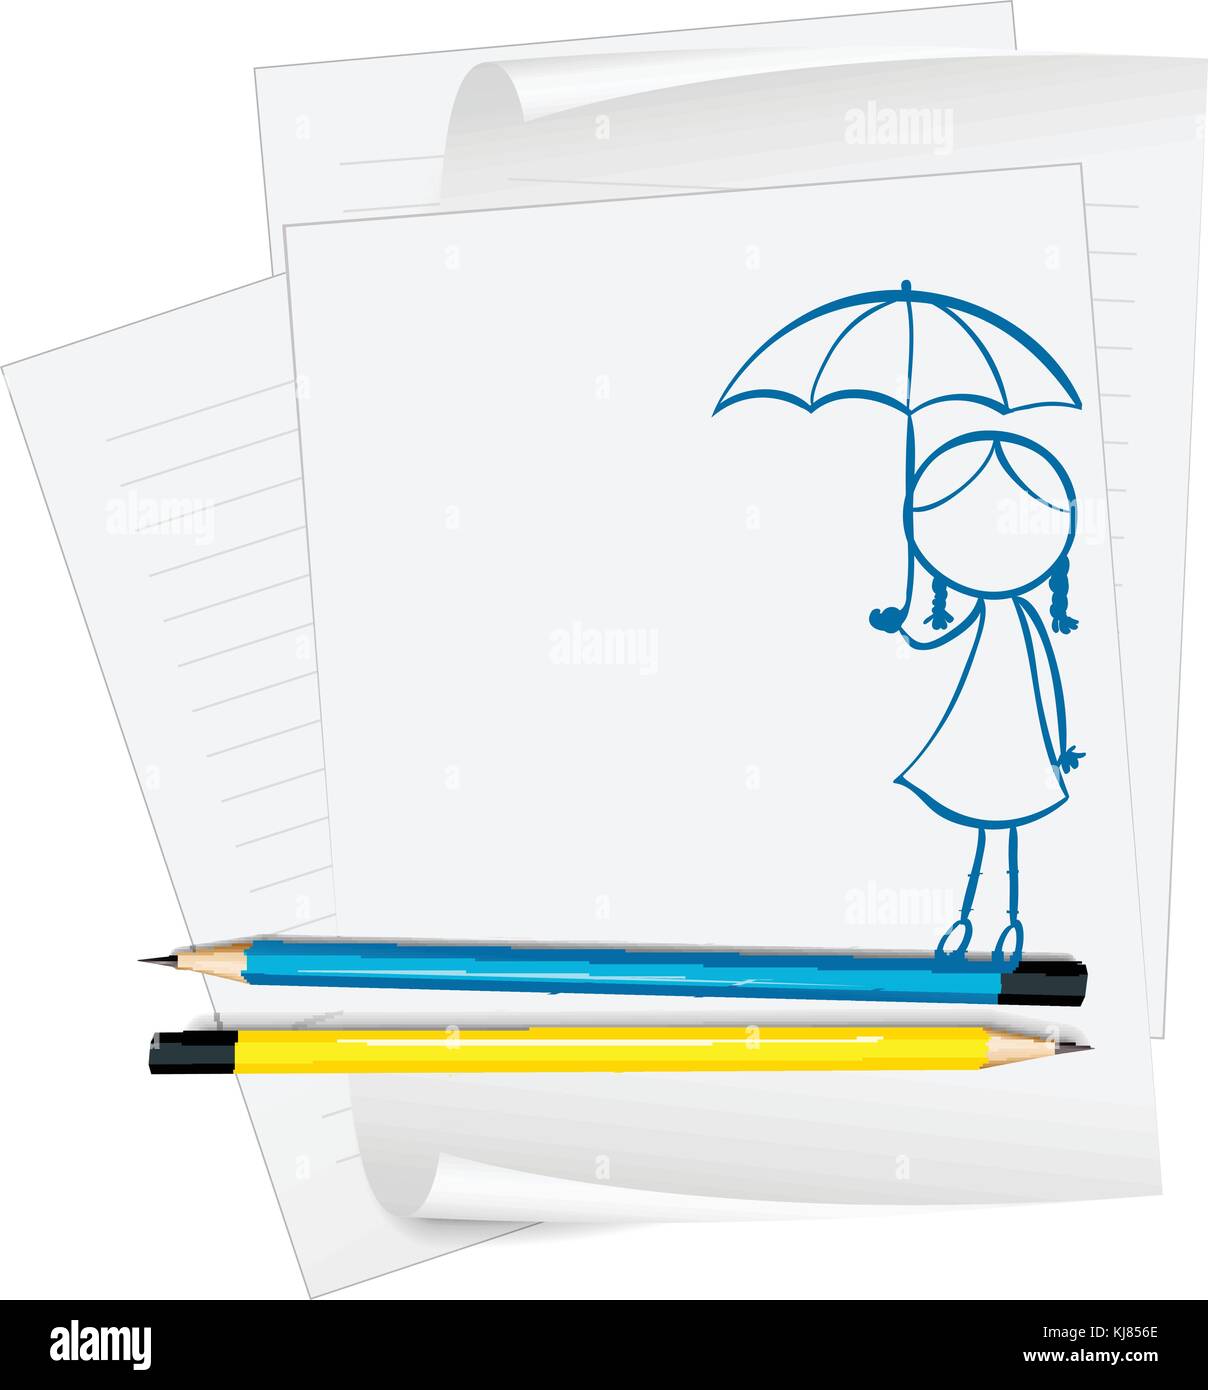 Illustration of a paper with an image of a child holding an umbrella on a white background Stock Vector